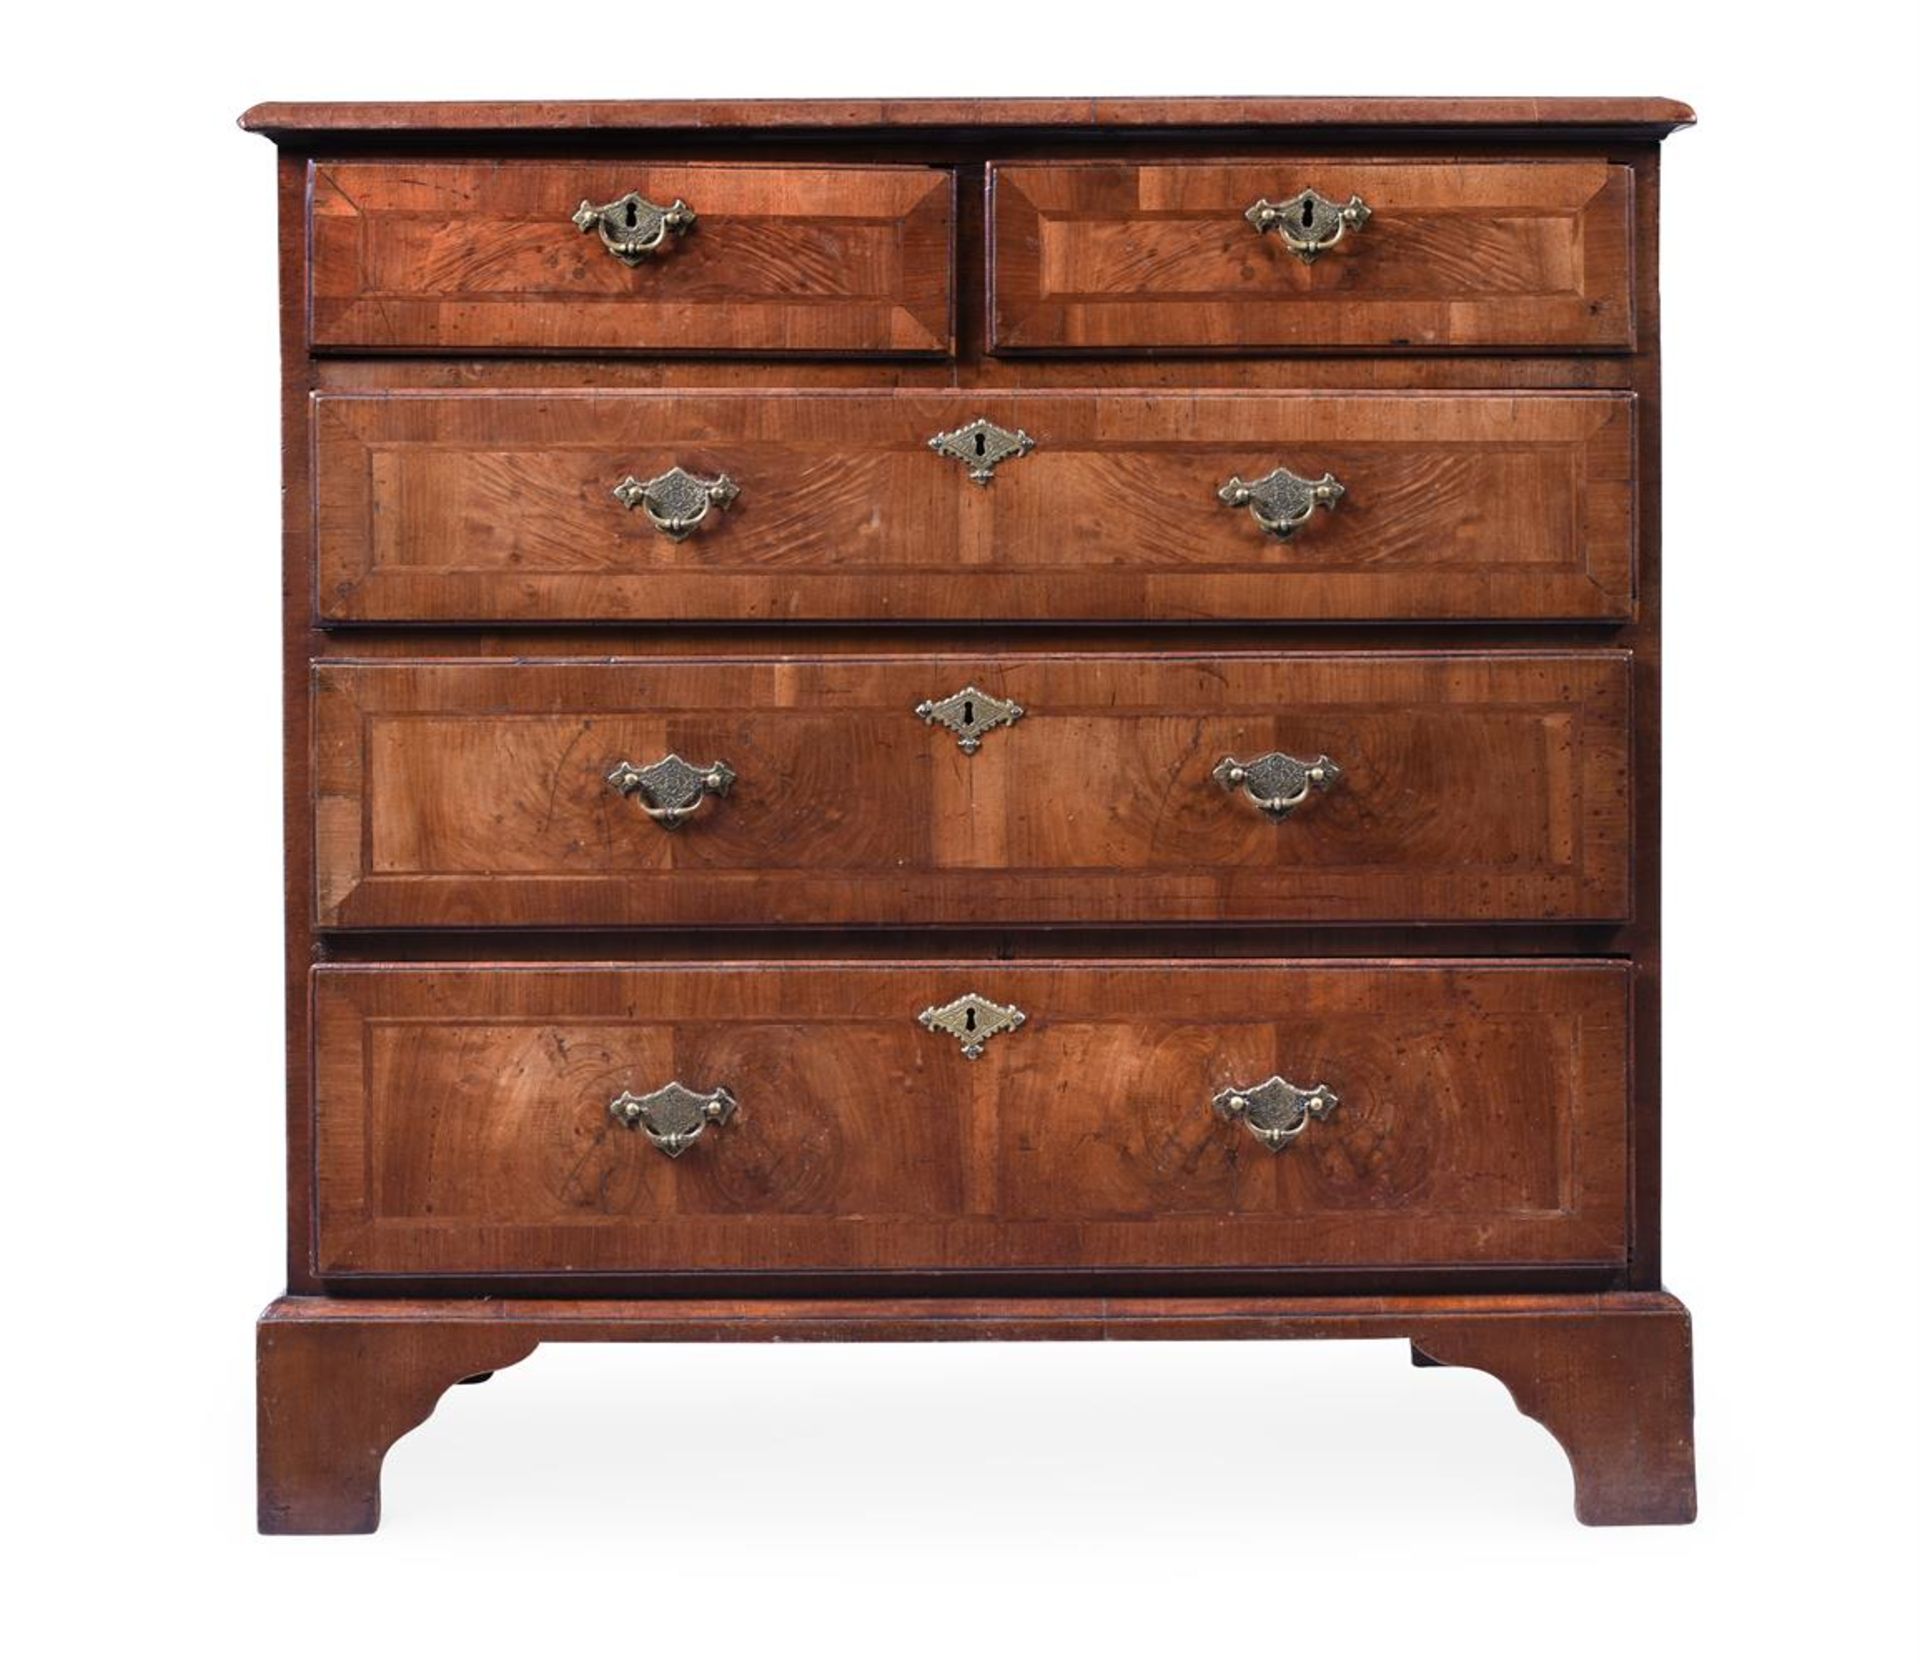 A WALNUT AND CROSSBANDED CHEST OF DRAWERS